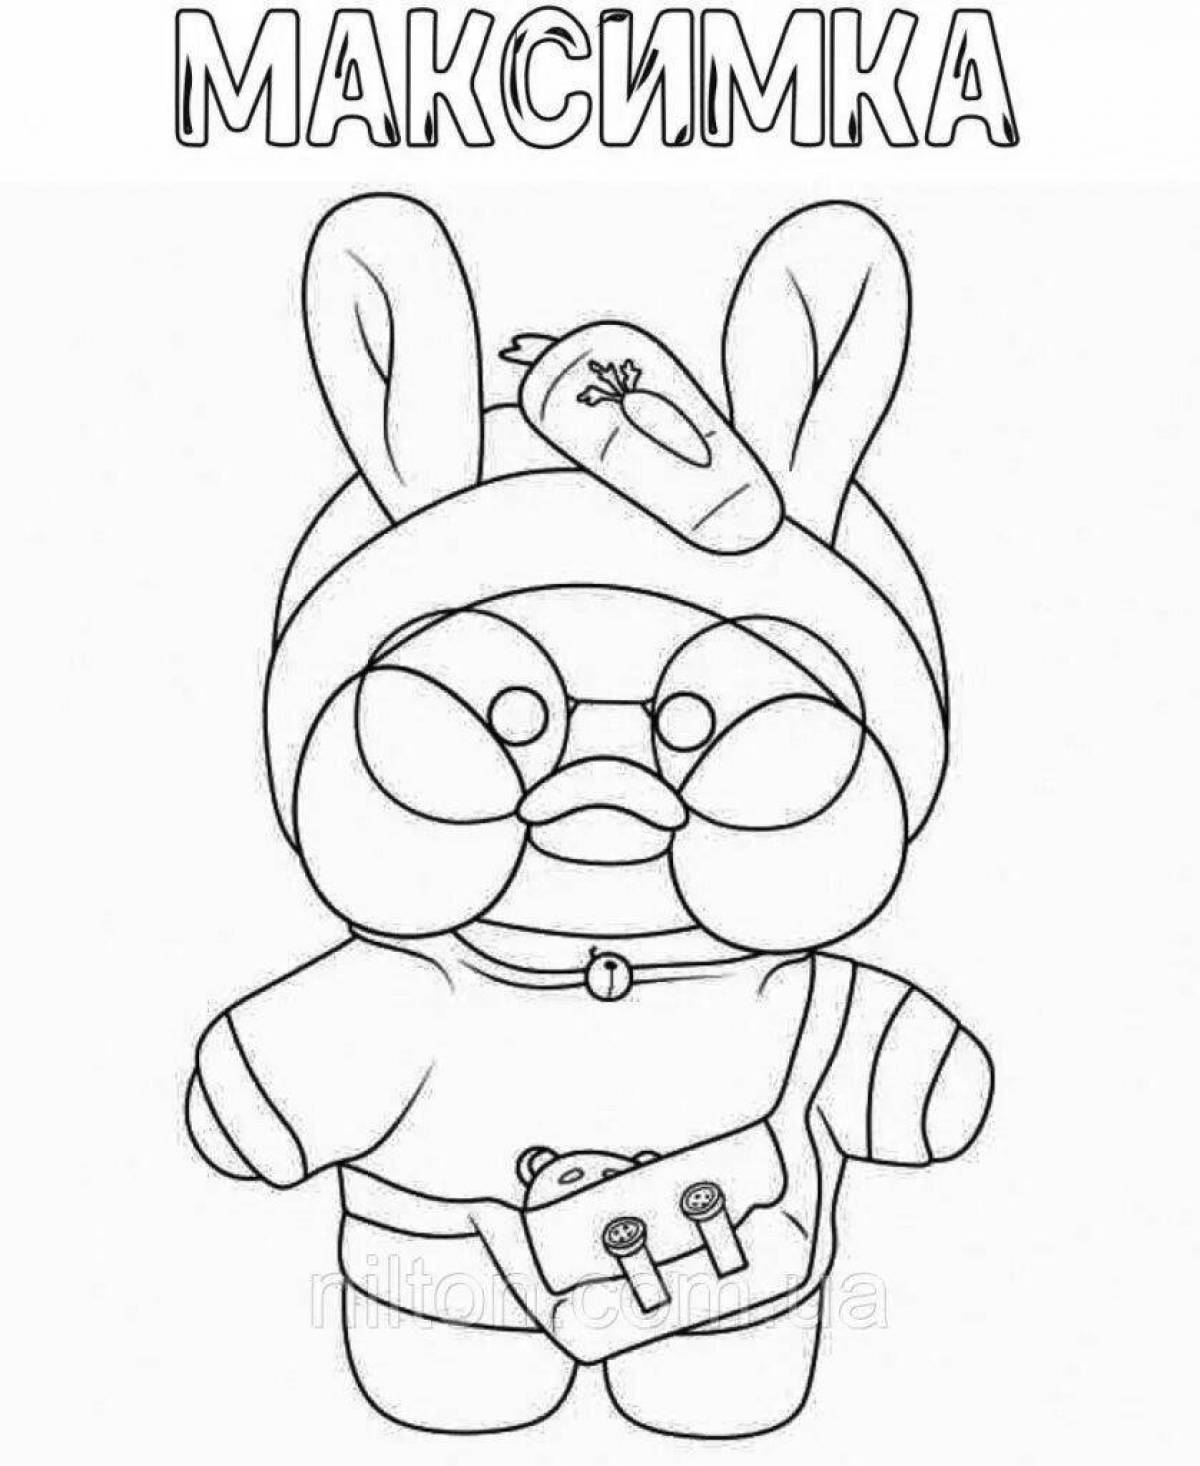 Amazing duck coloring page from tik tok